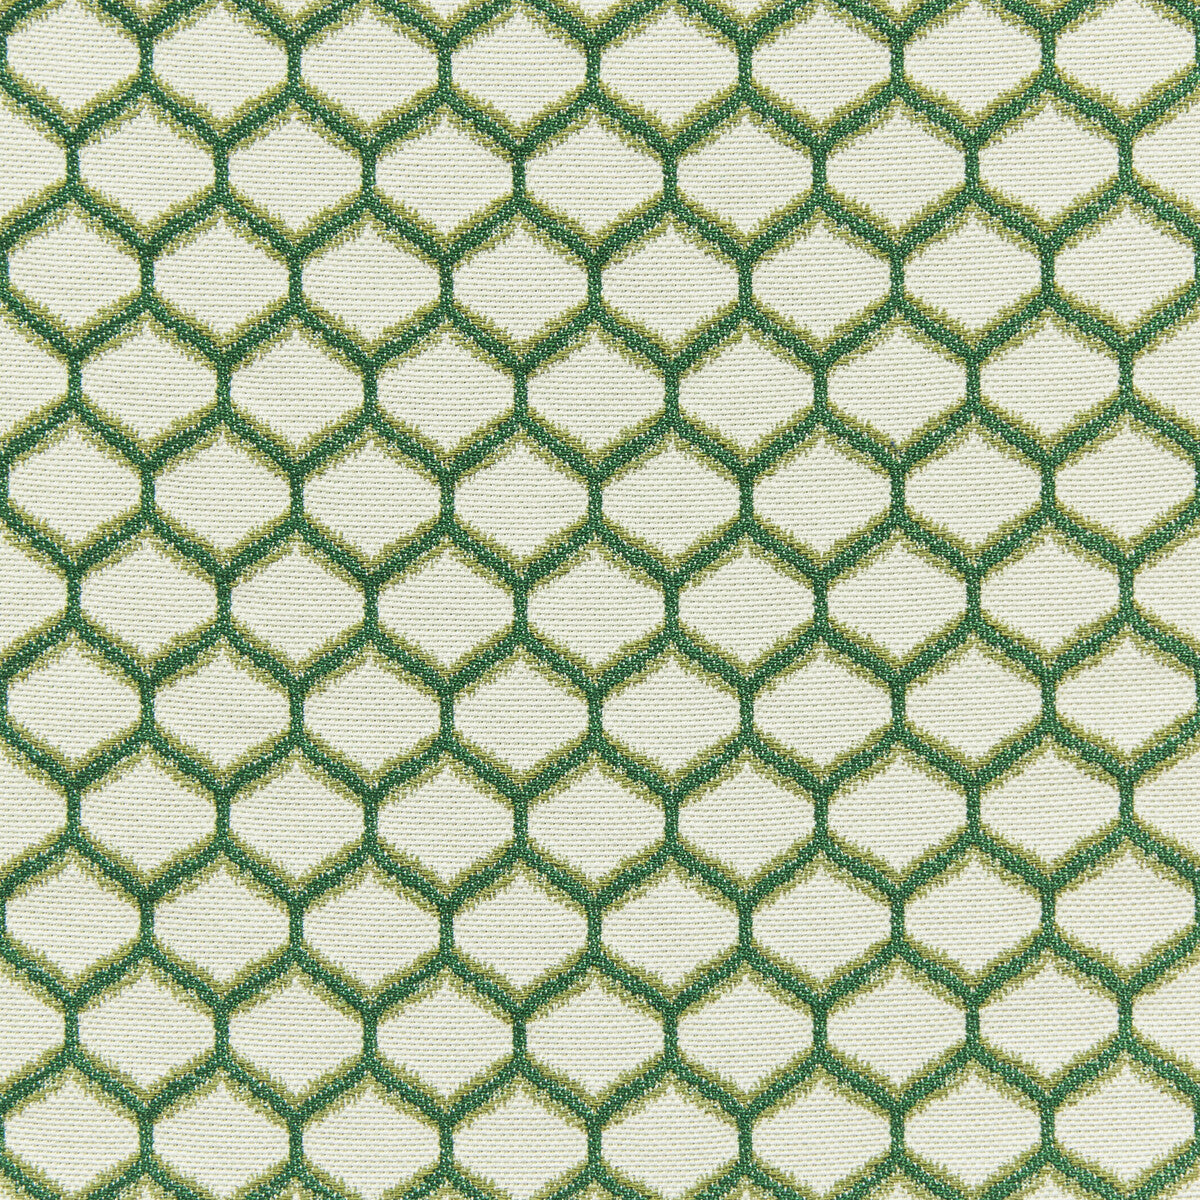 Elmley Weave fabric in leaf color - pattern 2020105.3.0 - by Lee Jofa in the Linford Weaves collection